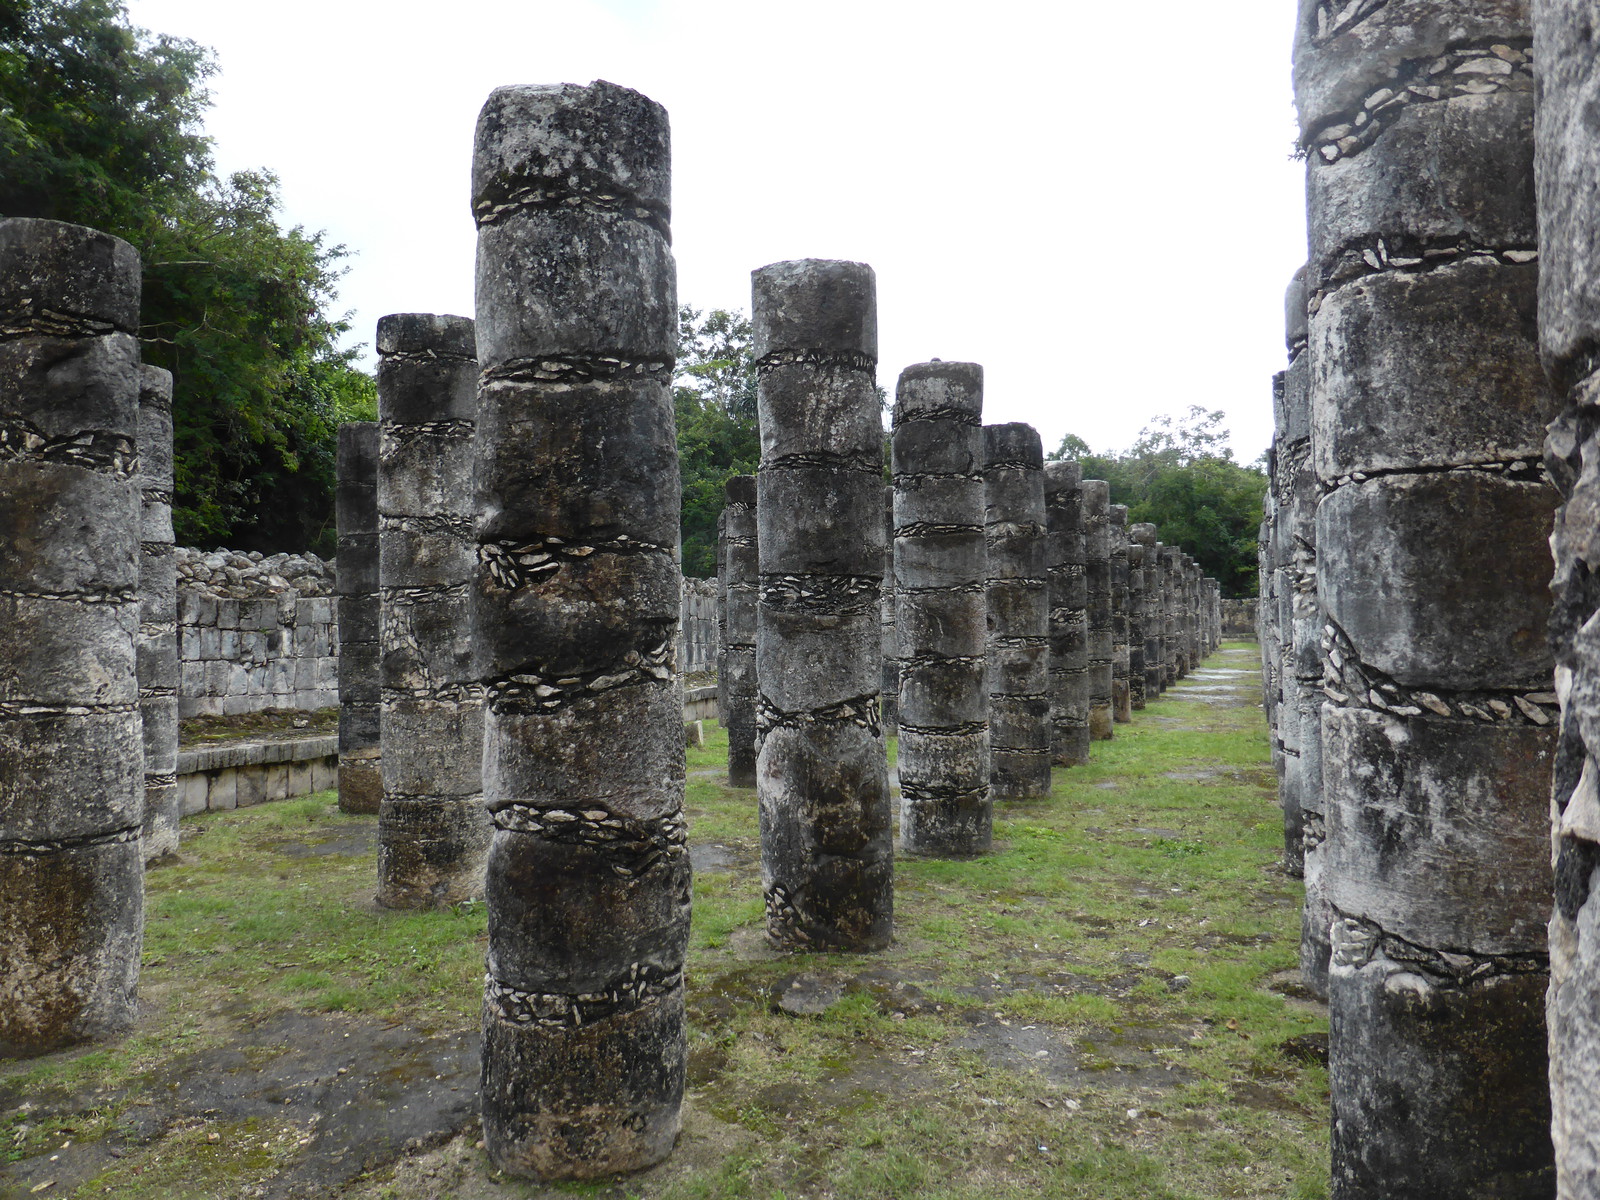 The Group of the Thousand Columns